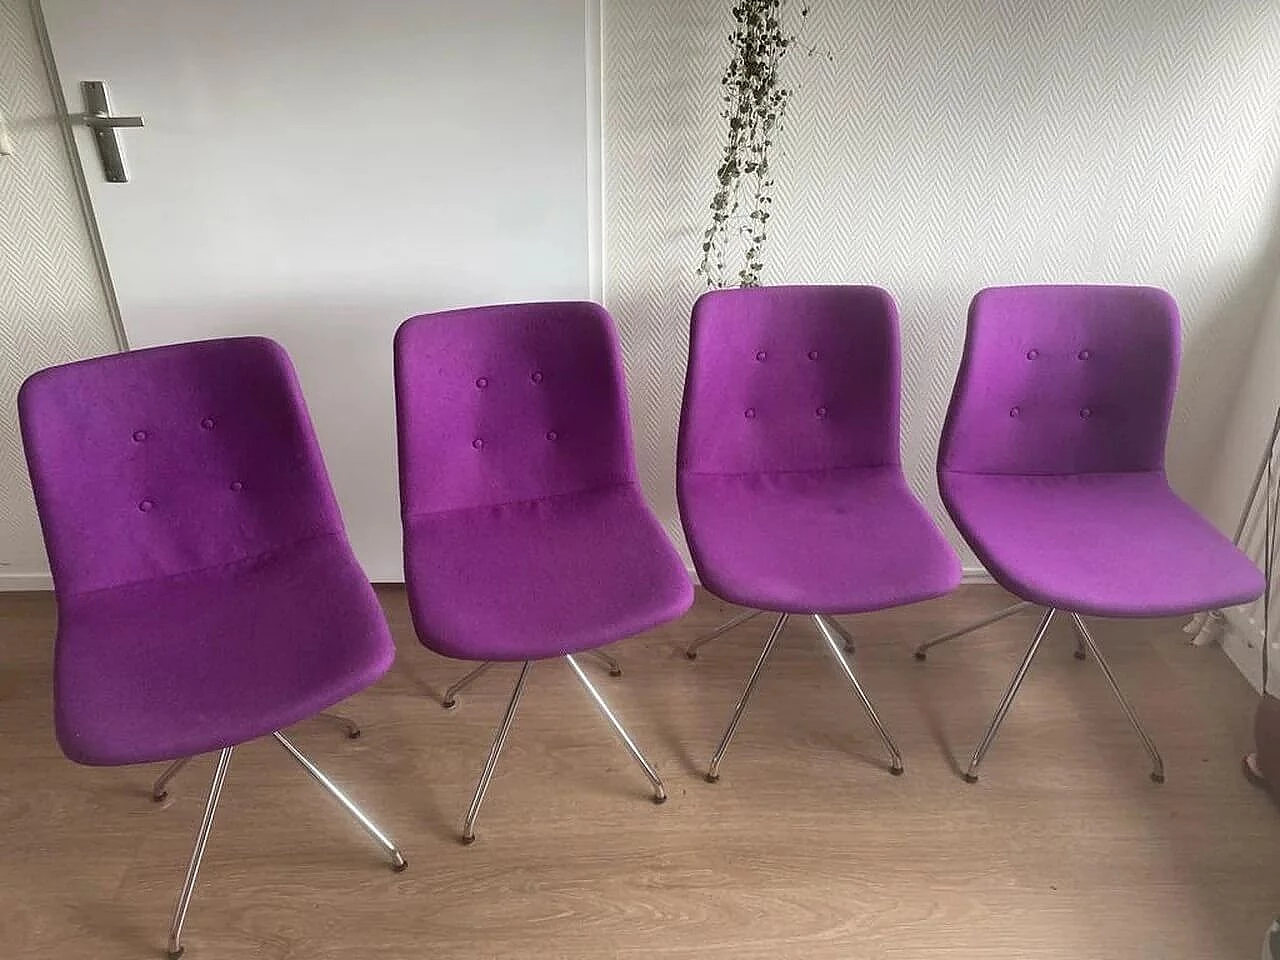 4 Primum Dynamic chairs in purple wool and metal by Bent Hansen 1